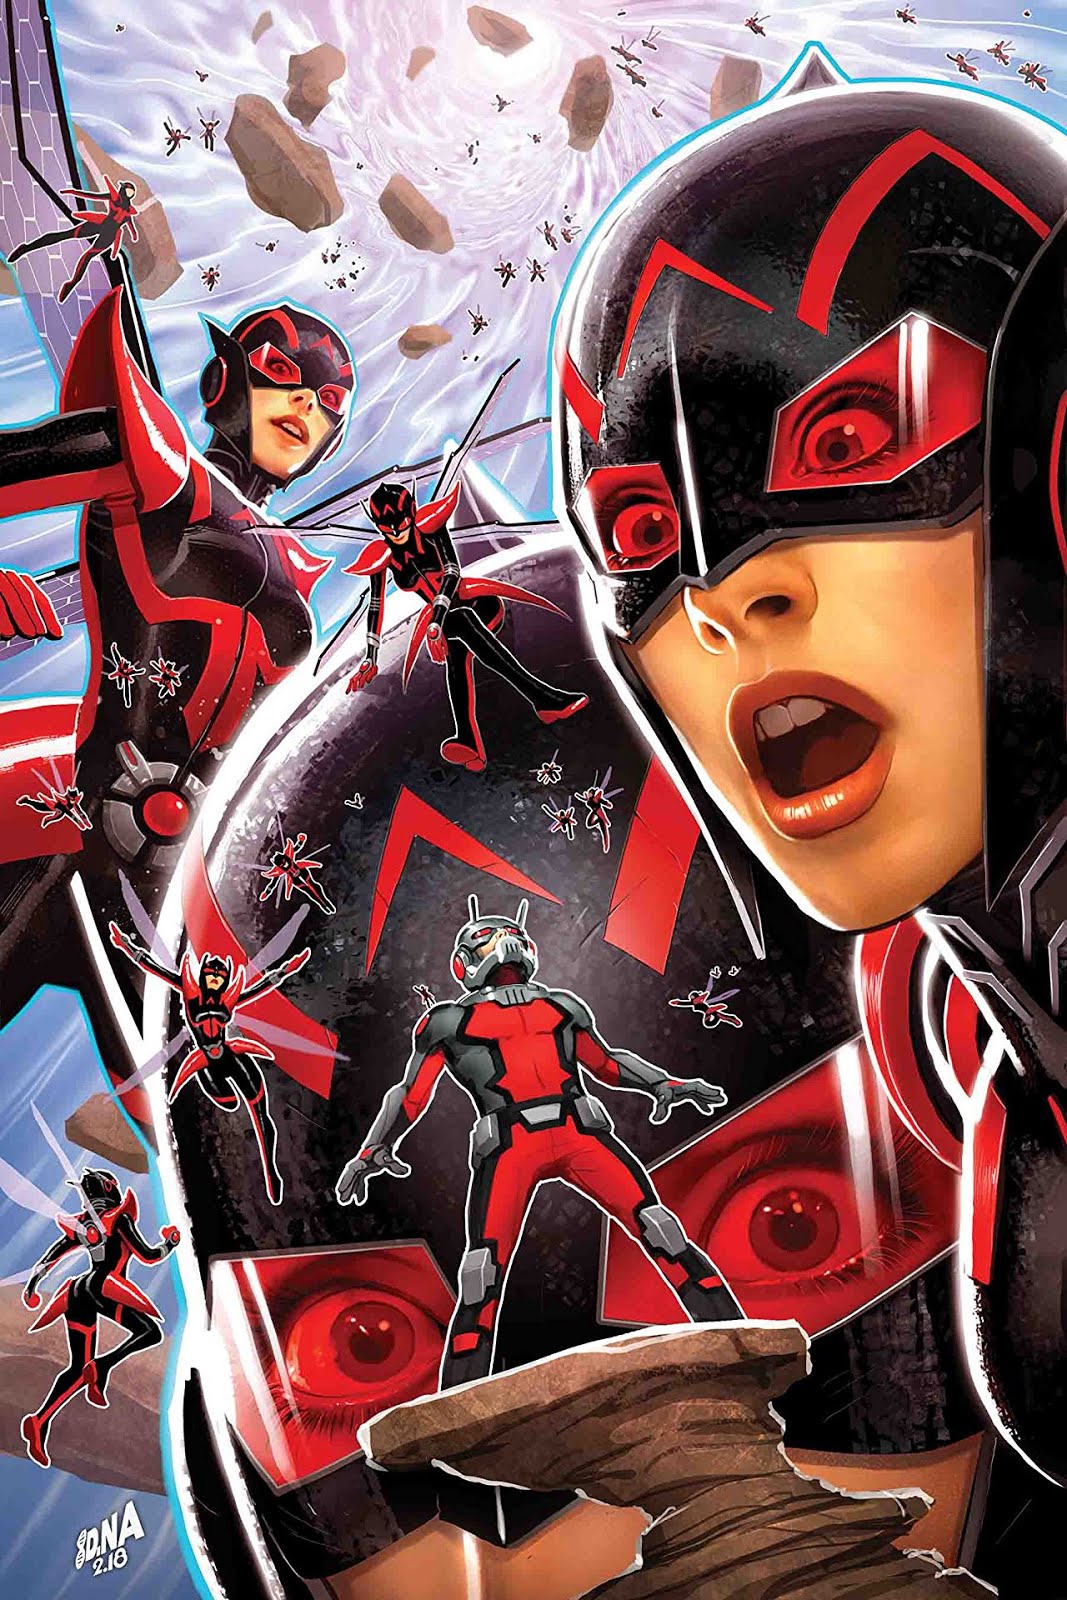 Ant-Man & The Wasp #3